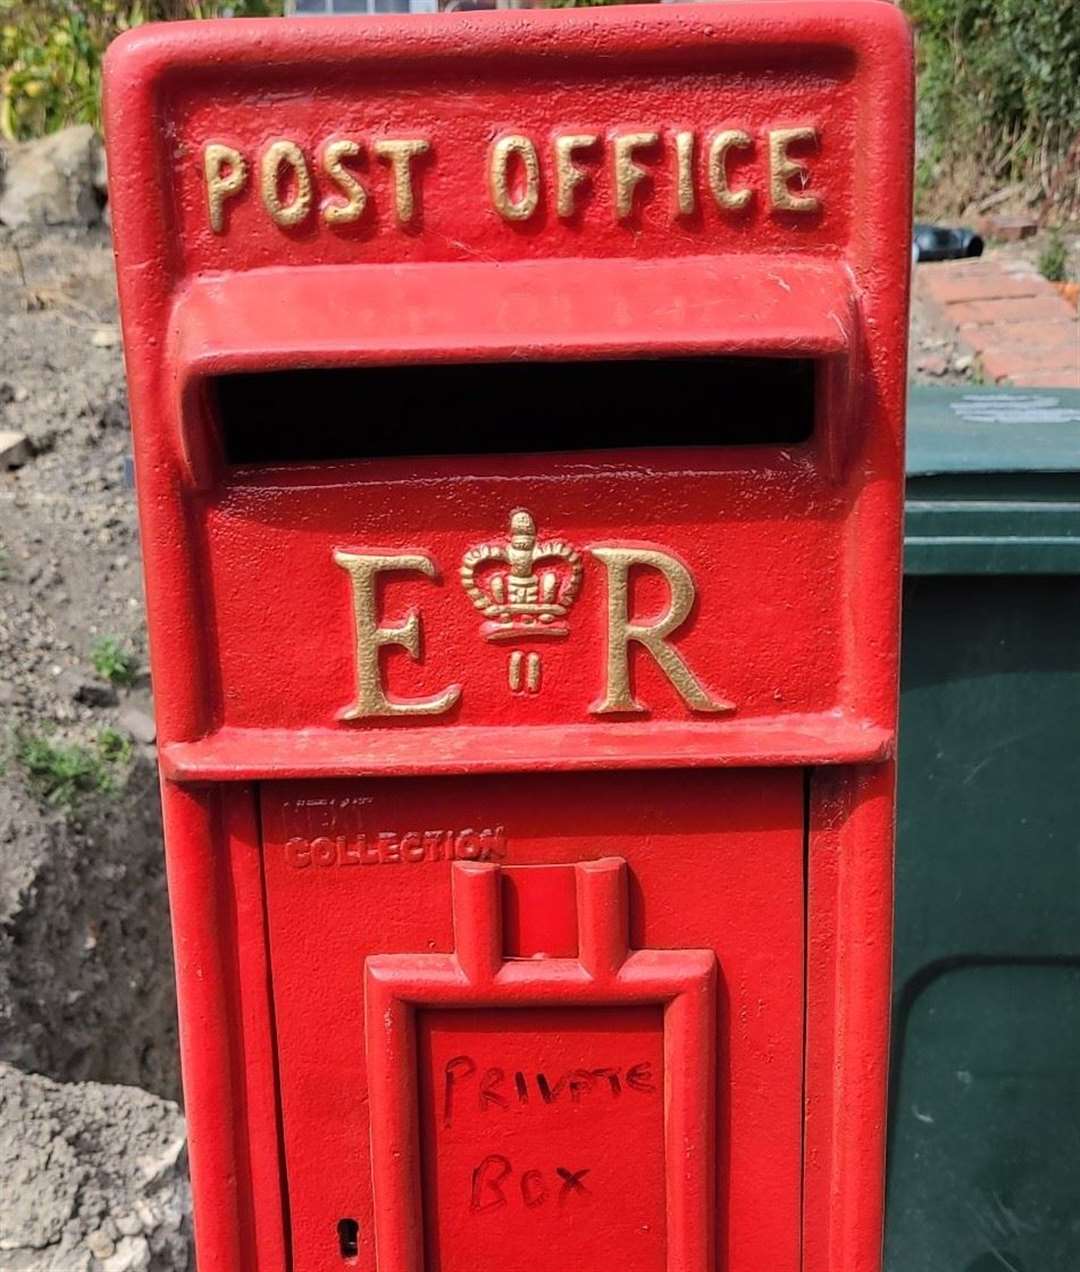 Due to confusion among his neighbours, he has hand written 'private postbox' until a sign he has ordered arrives